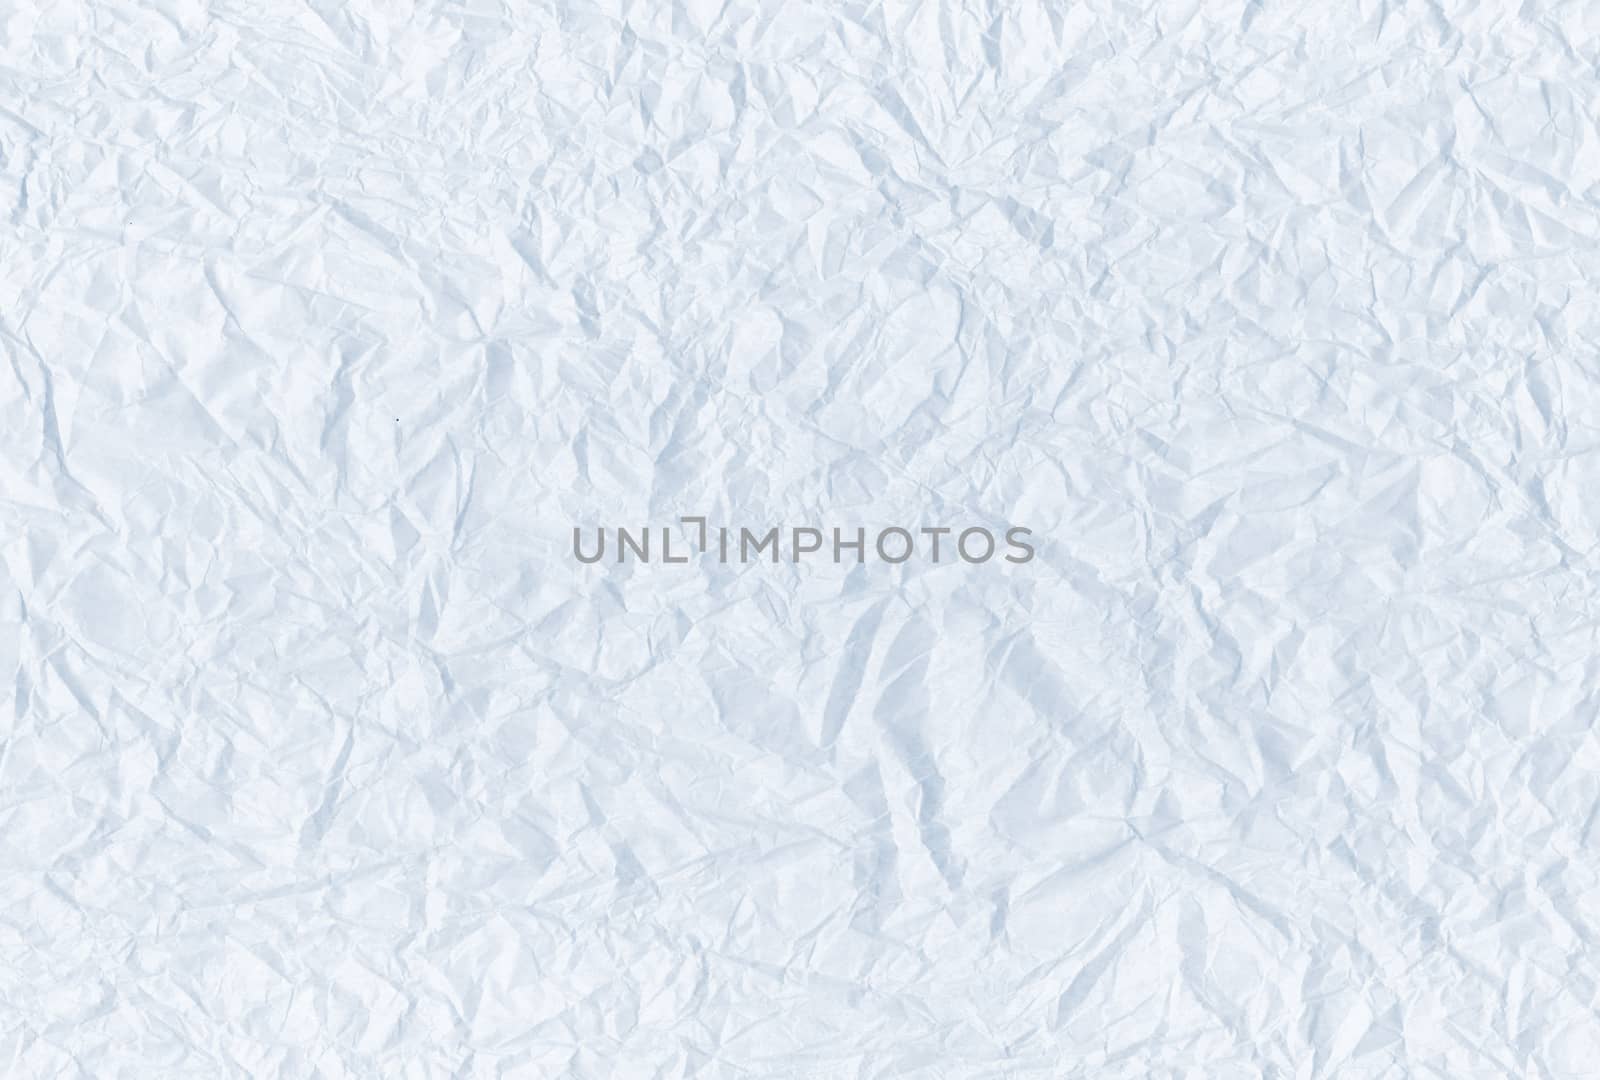 The light blue blank crumpled and grungy textured paper background